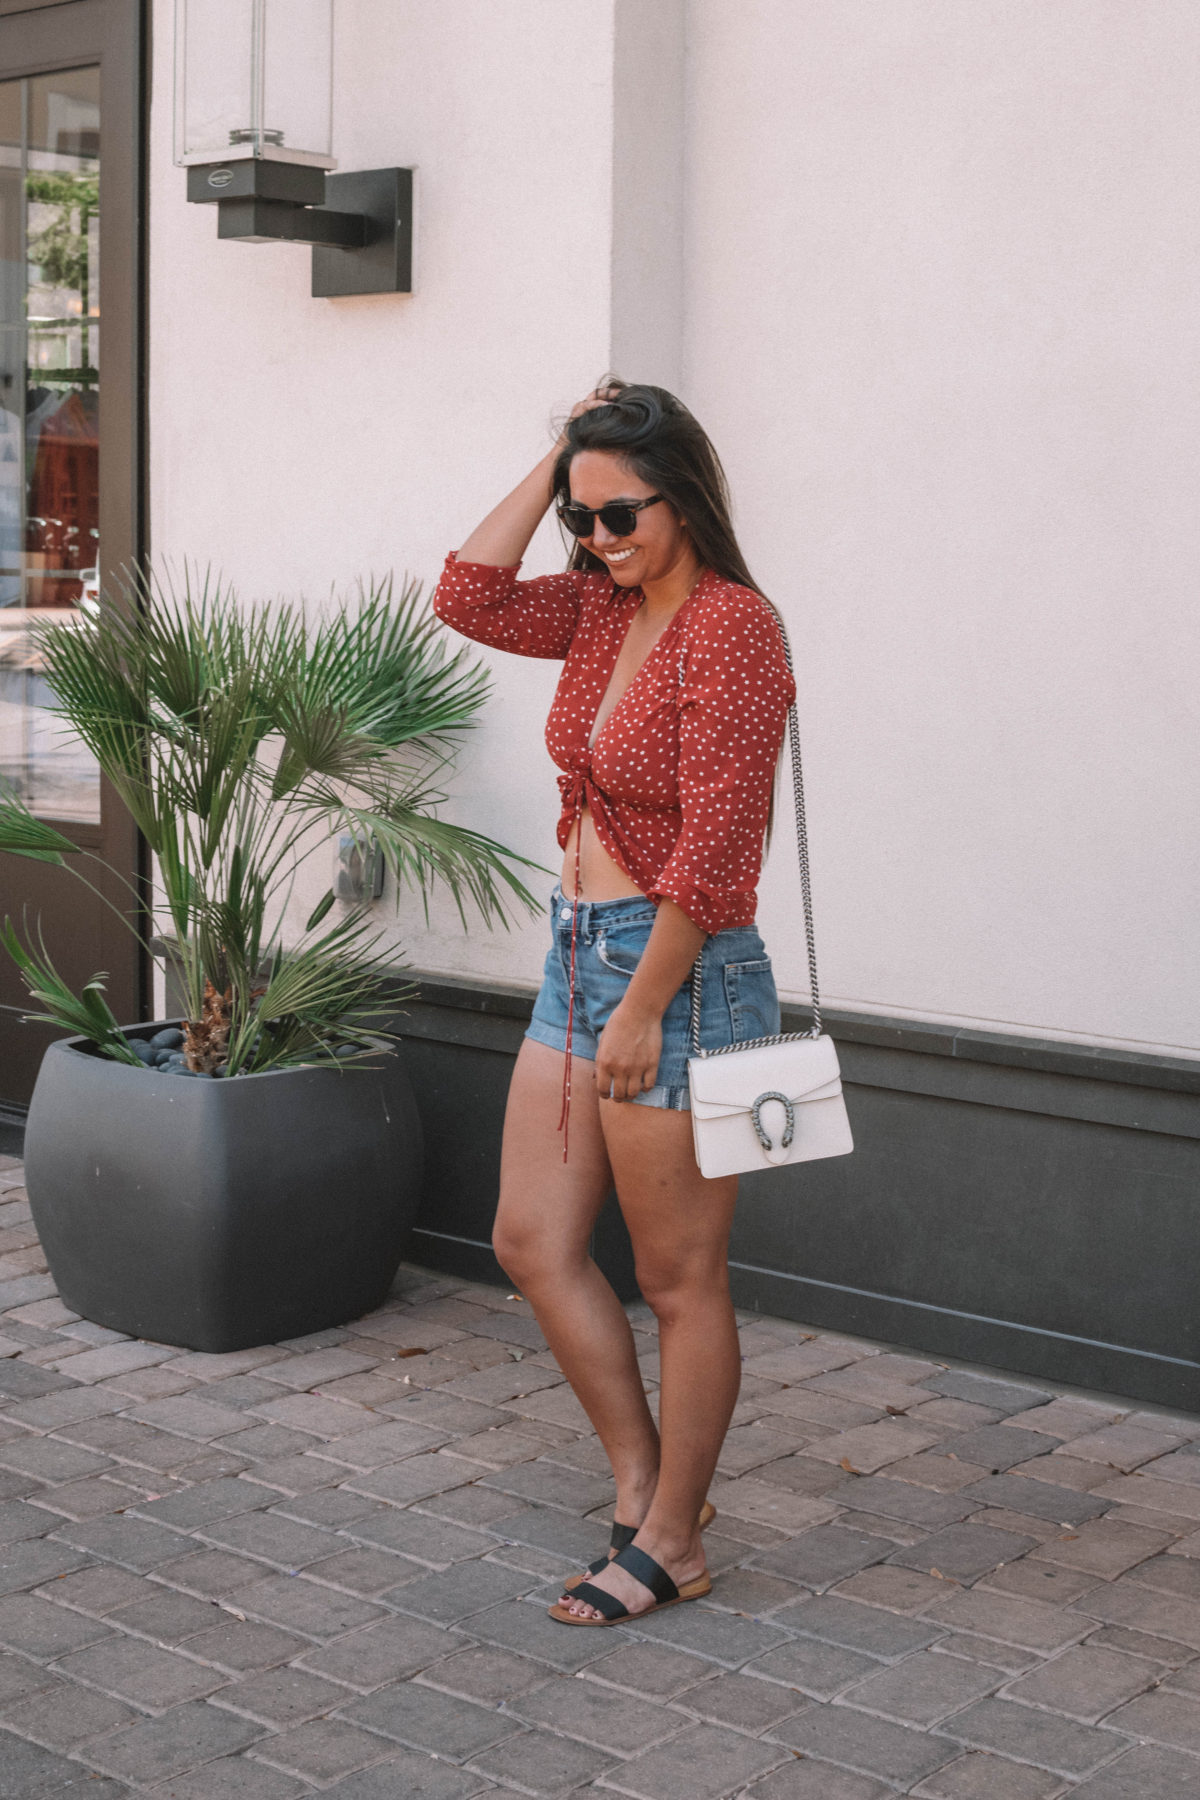 4th of July Outfits You Can Wear Long Past the Holiday - Curated by Kirsten